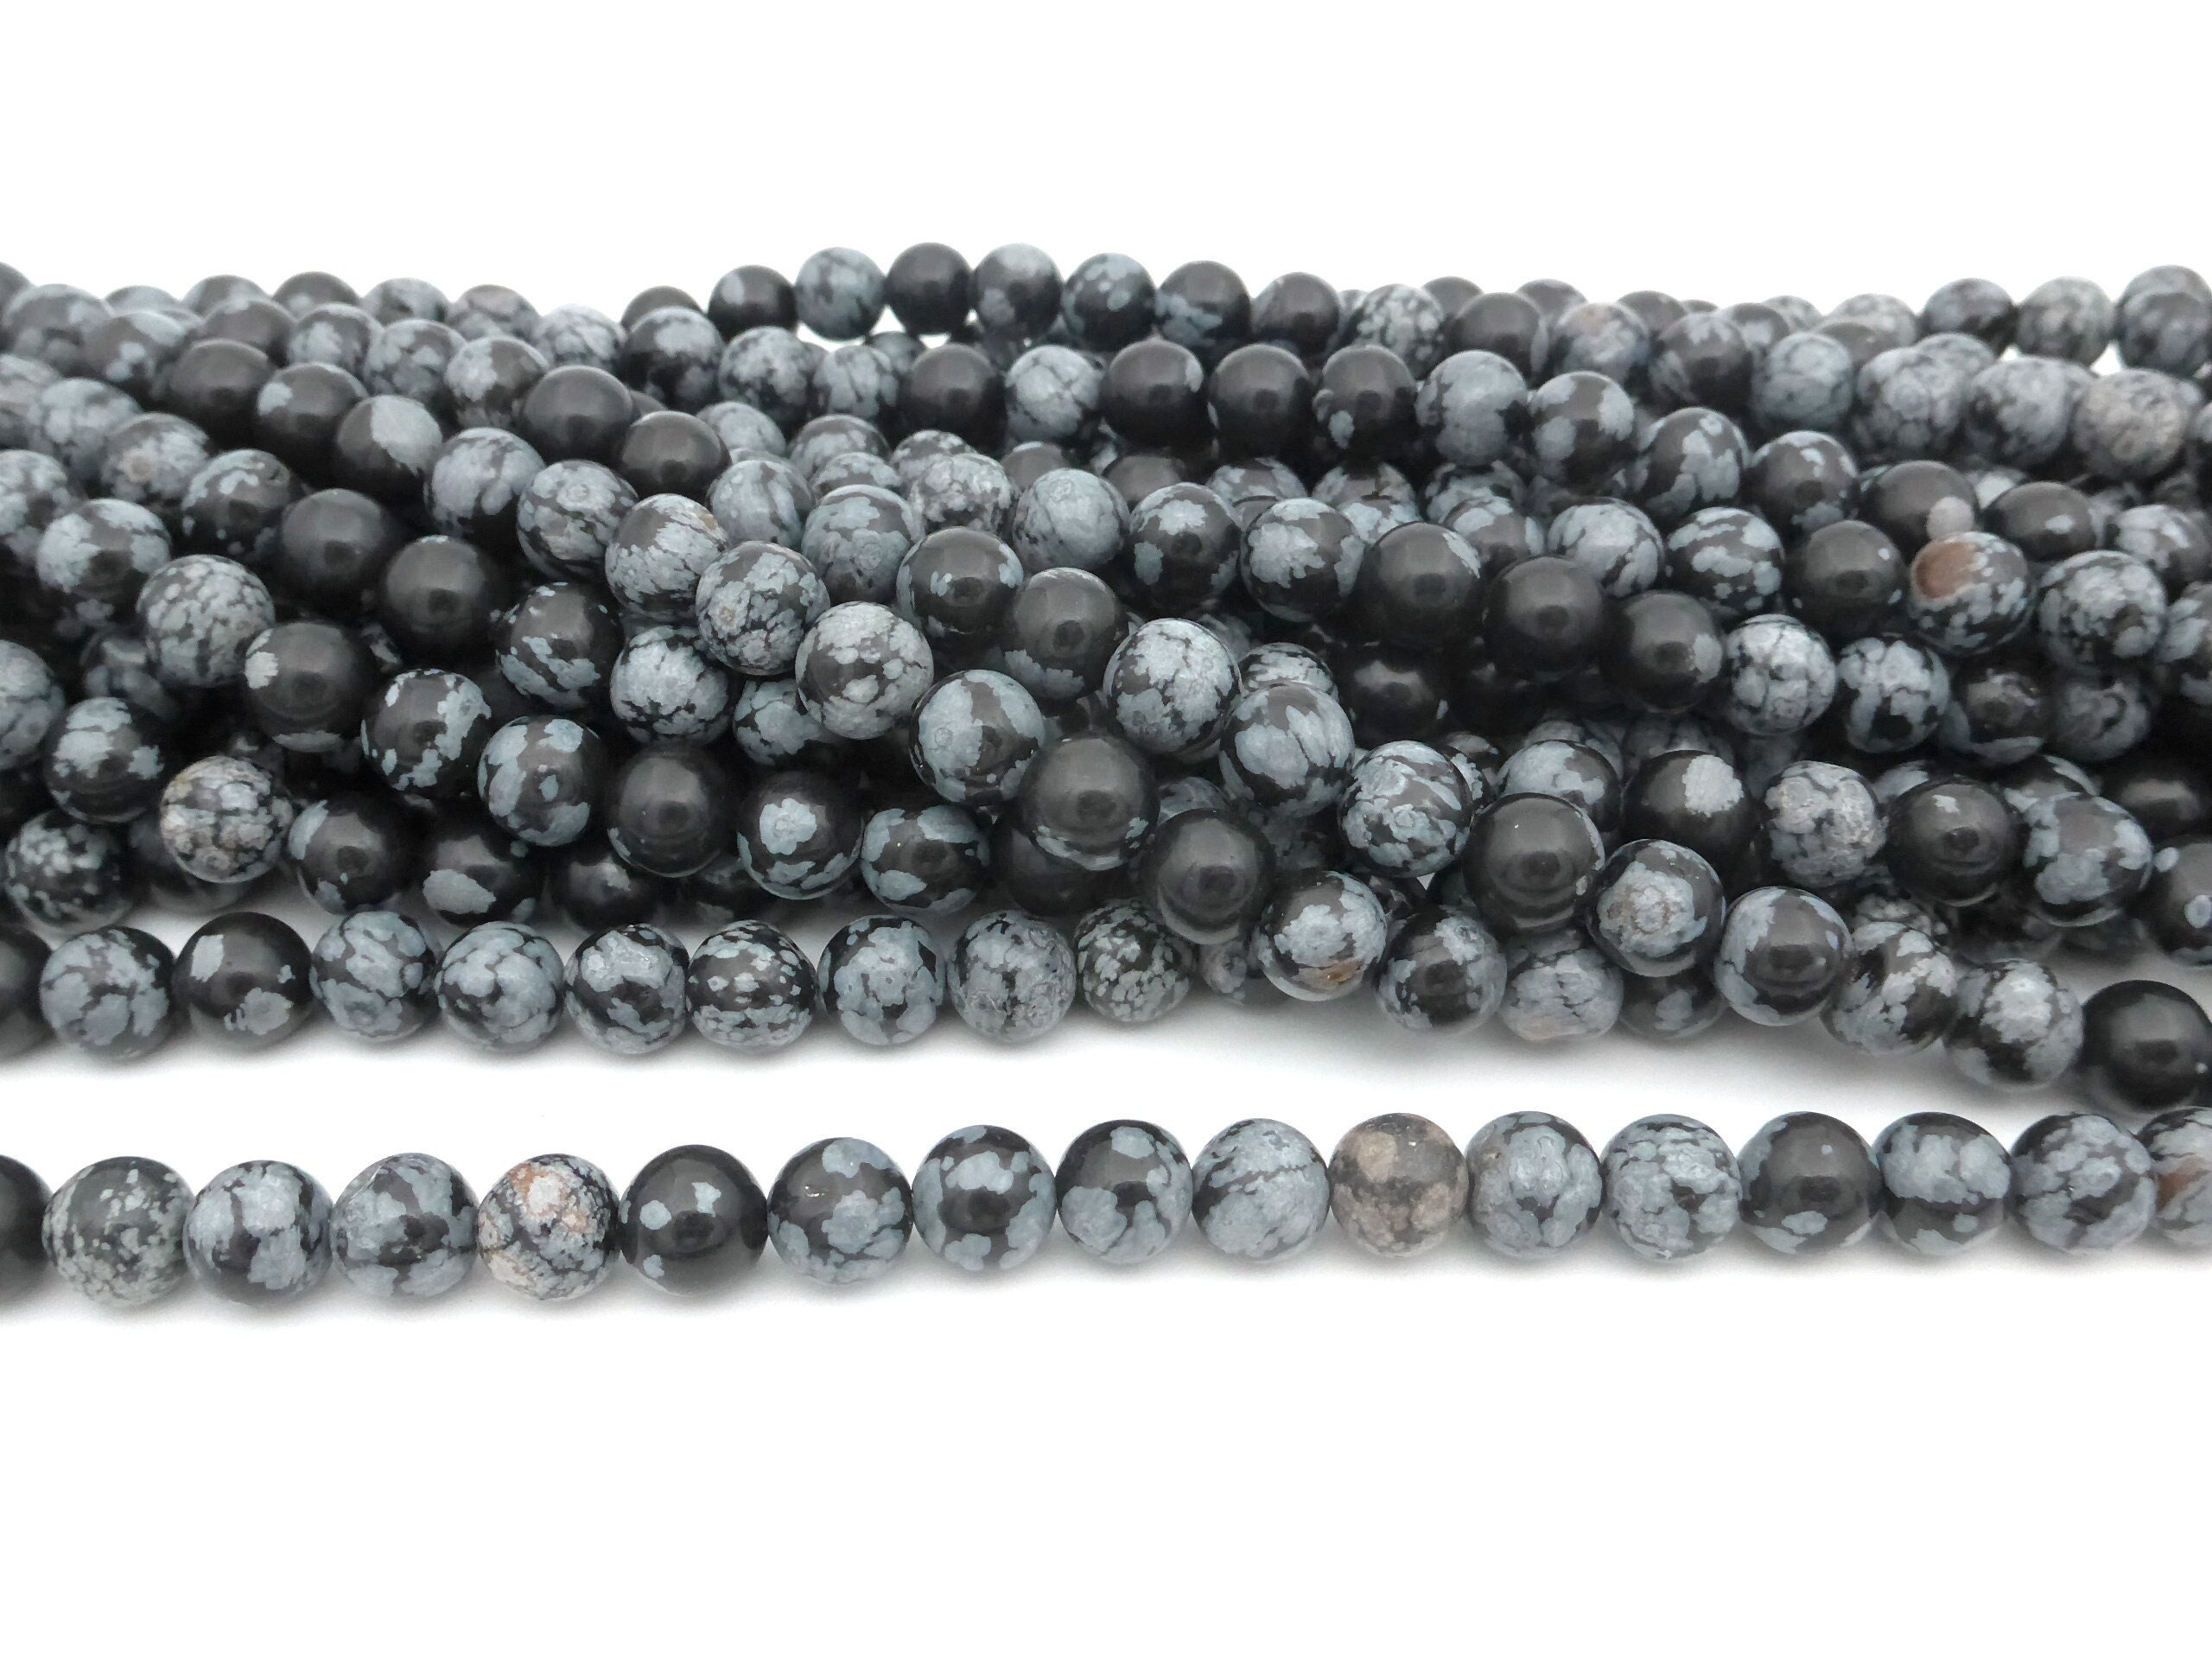 10x30mm 12 Constellations Oval Gray Agate Stone Beads For Jewelry Making 1 pcs 